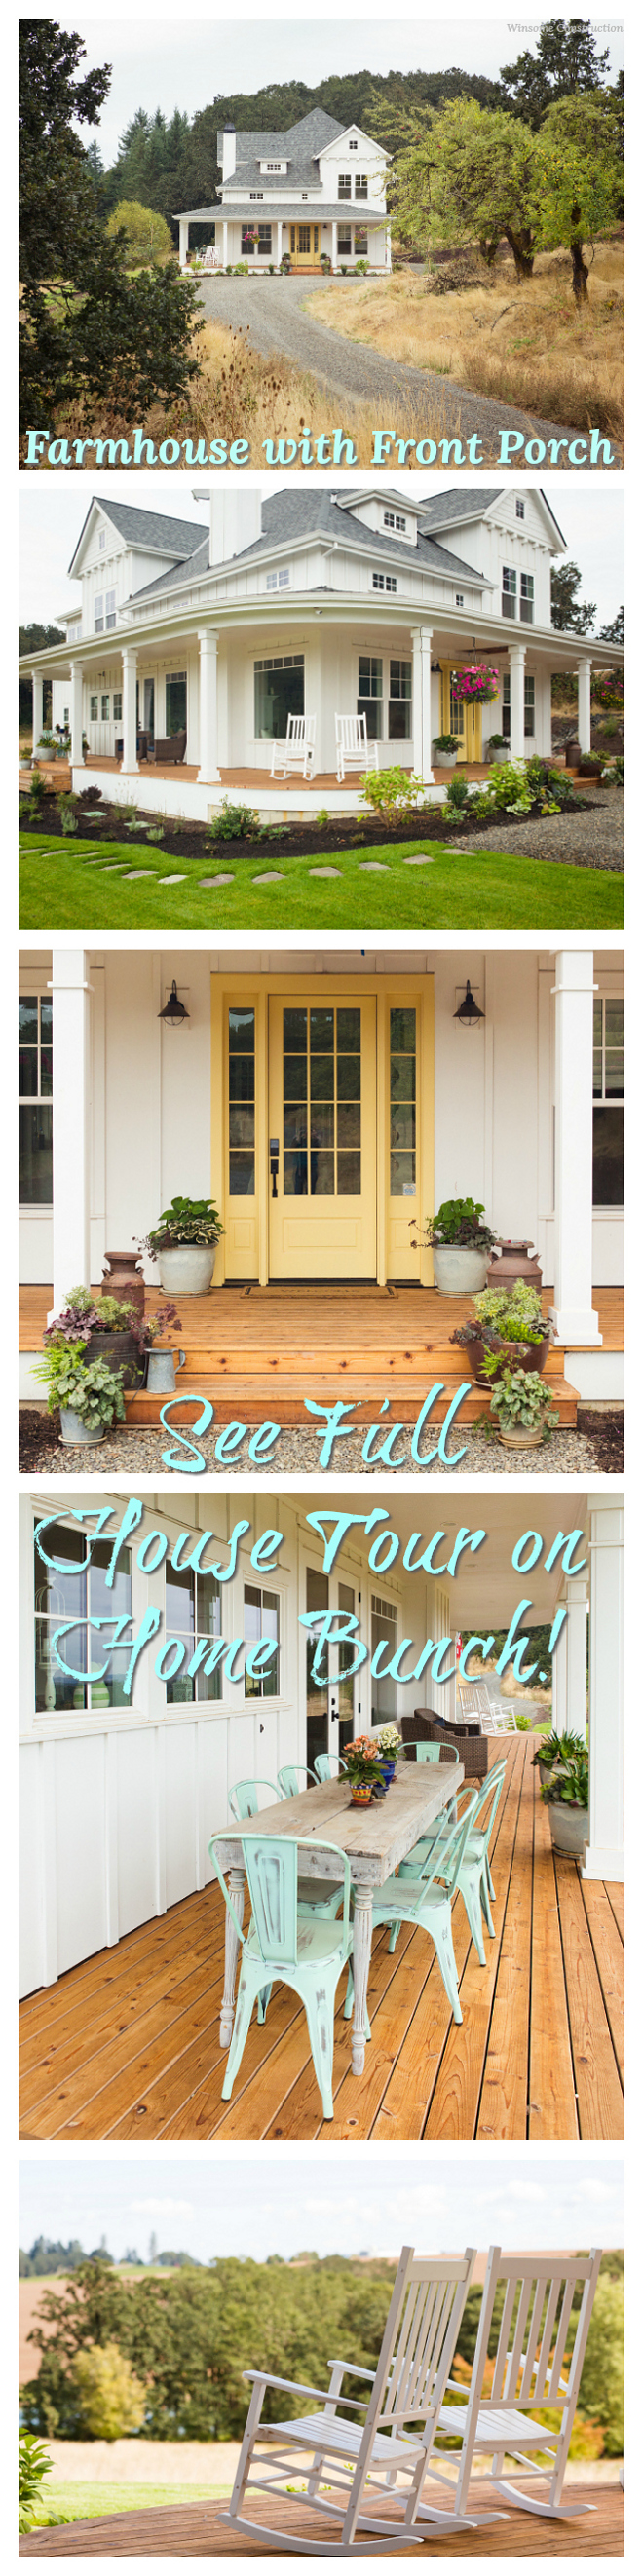 Farmhouse with Front Porch Farmhouse with Front Porch Farmhouse with Front Porch Farmhouse with Front Porch #FarmhouseFrontPorch